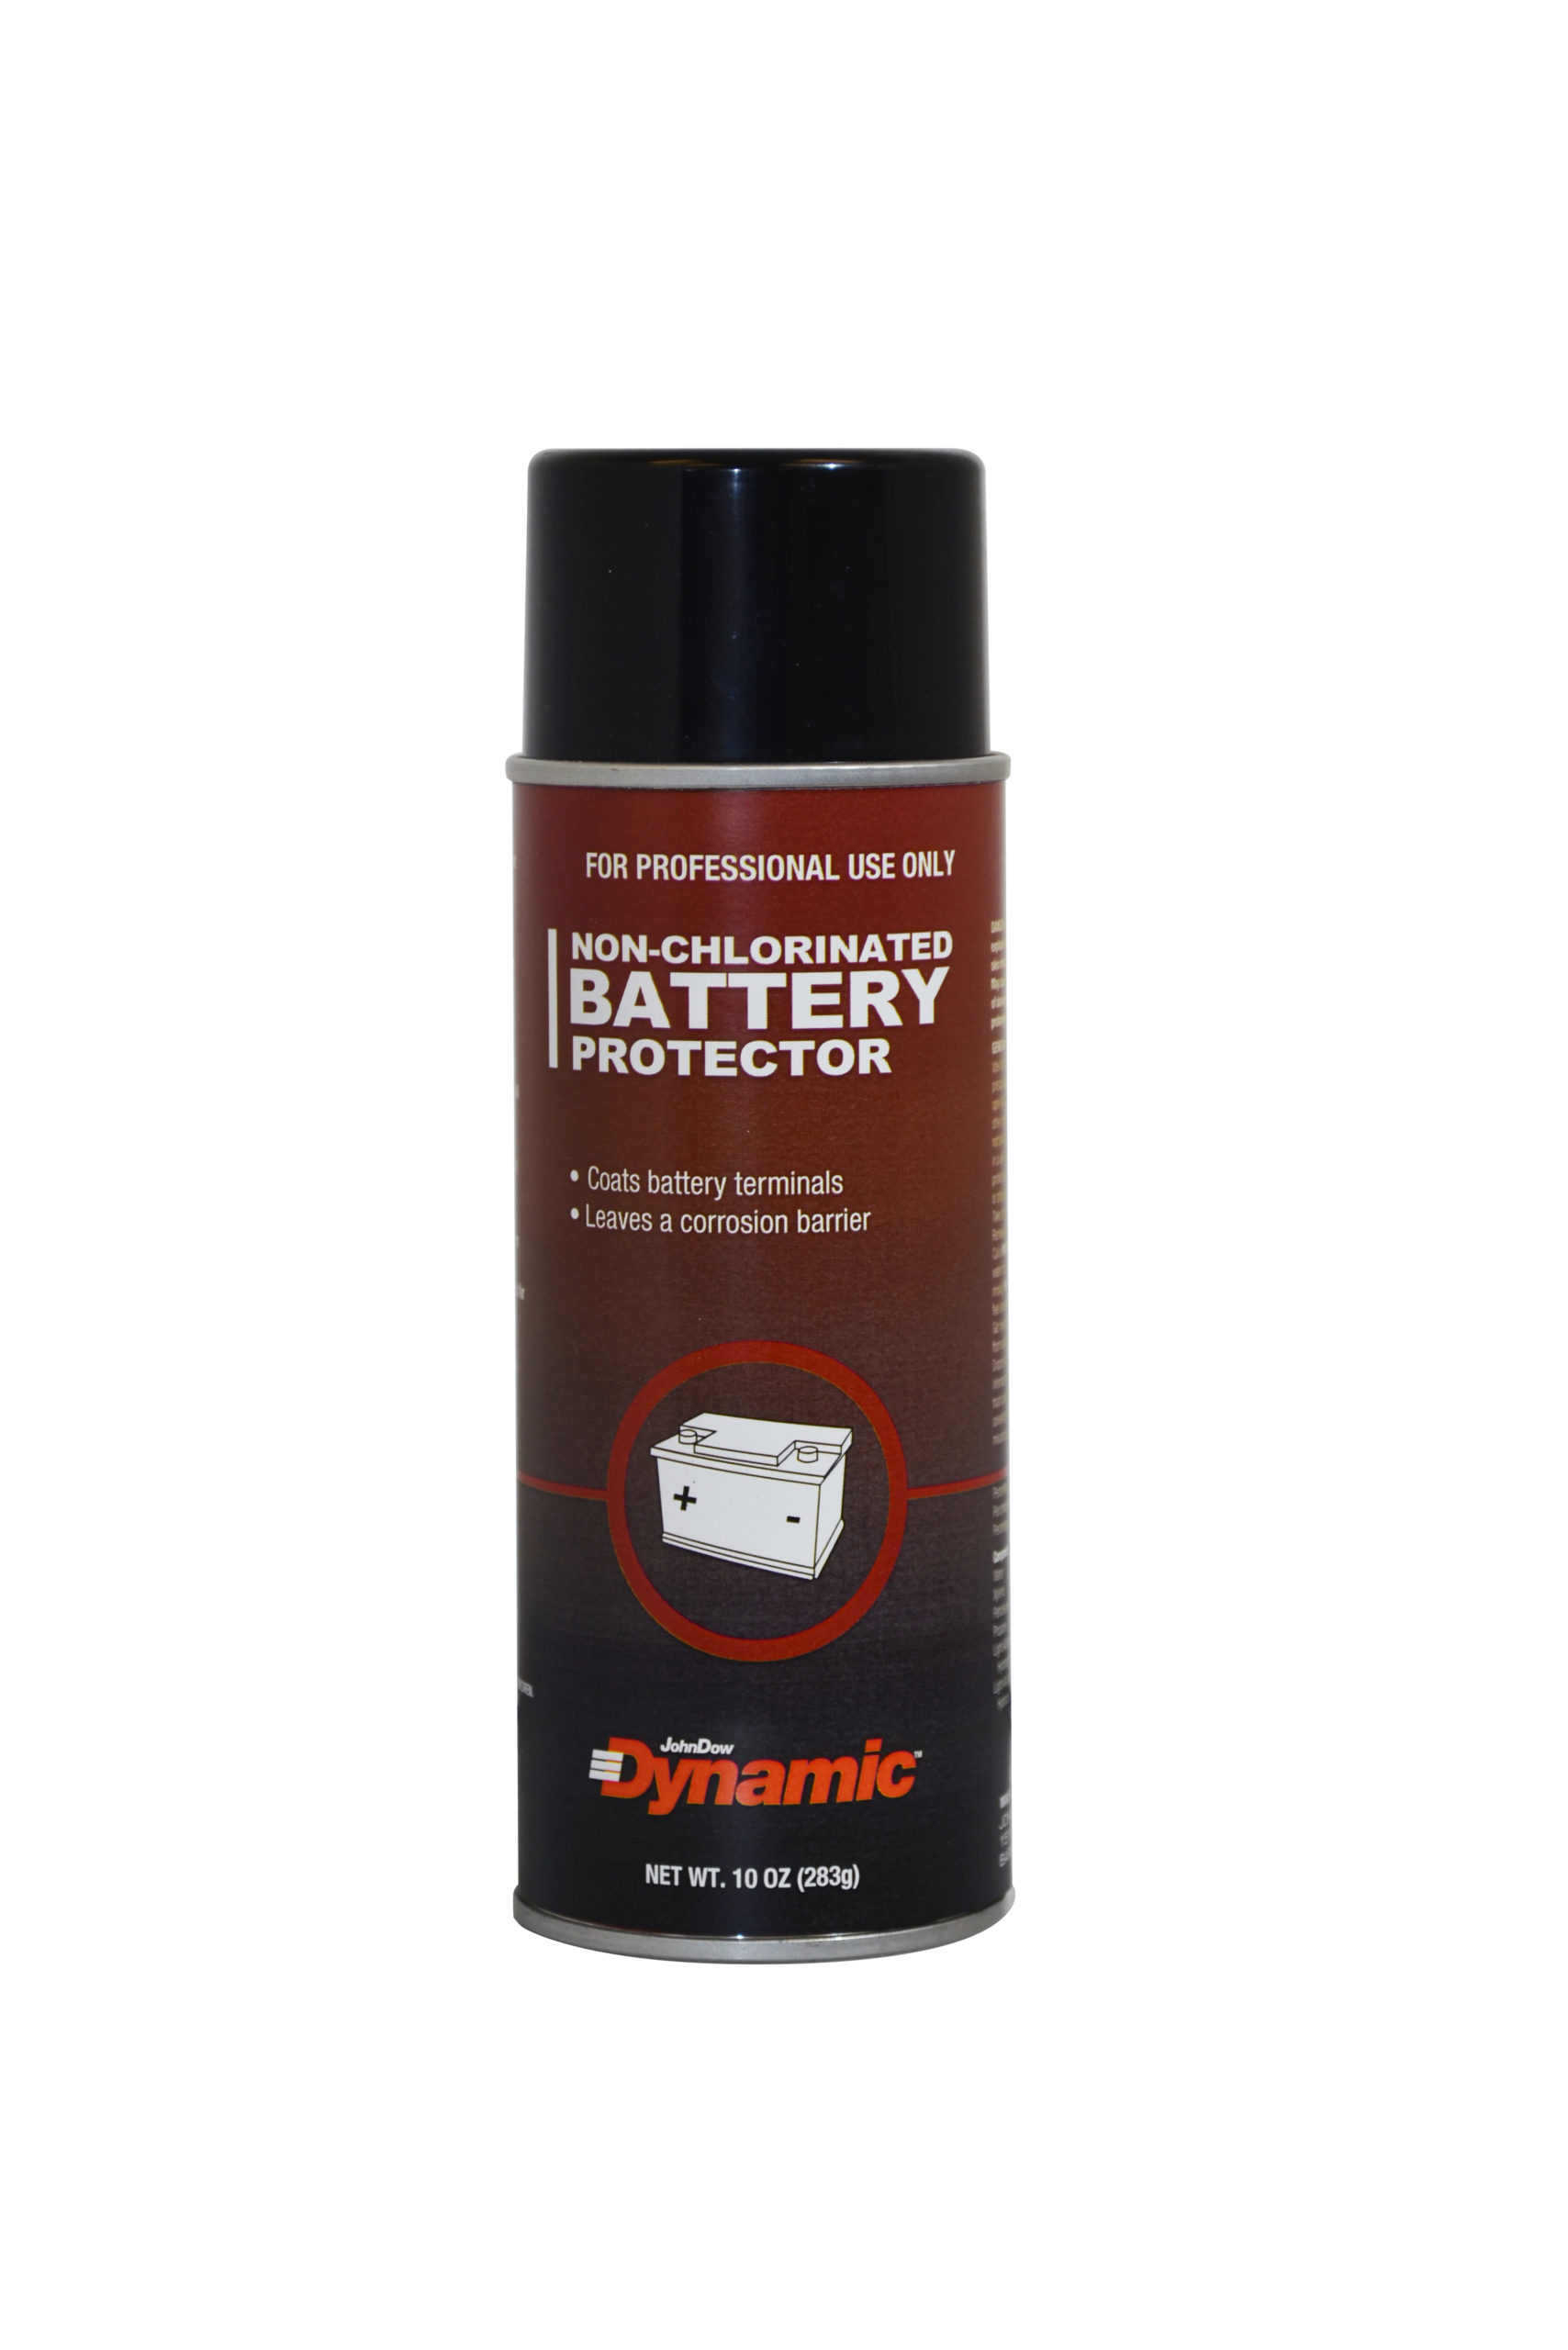 Battery Service Products | JohnDow